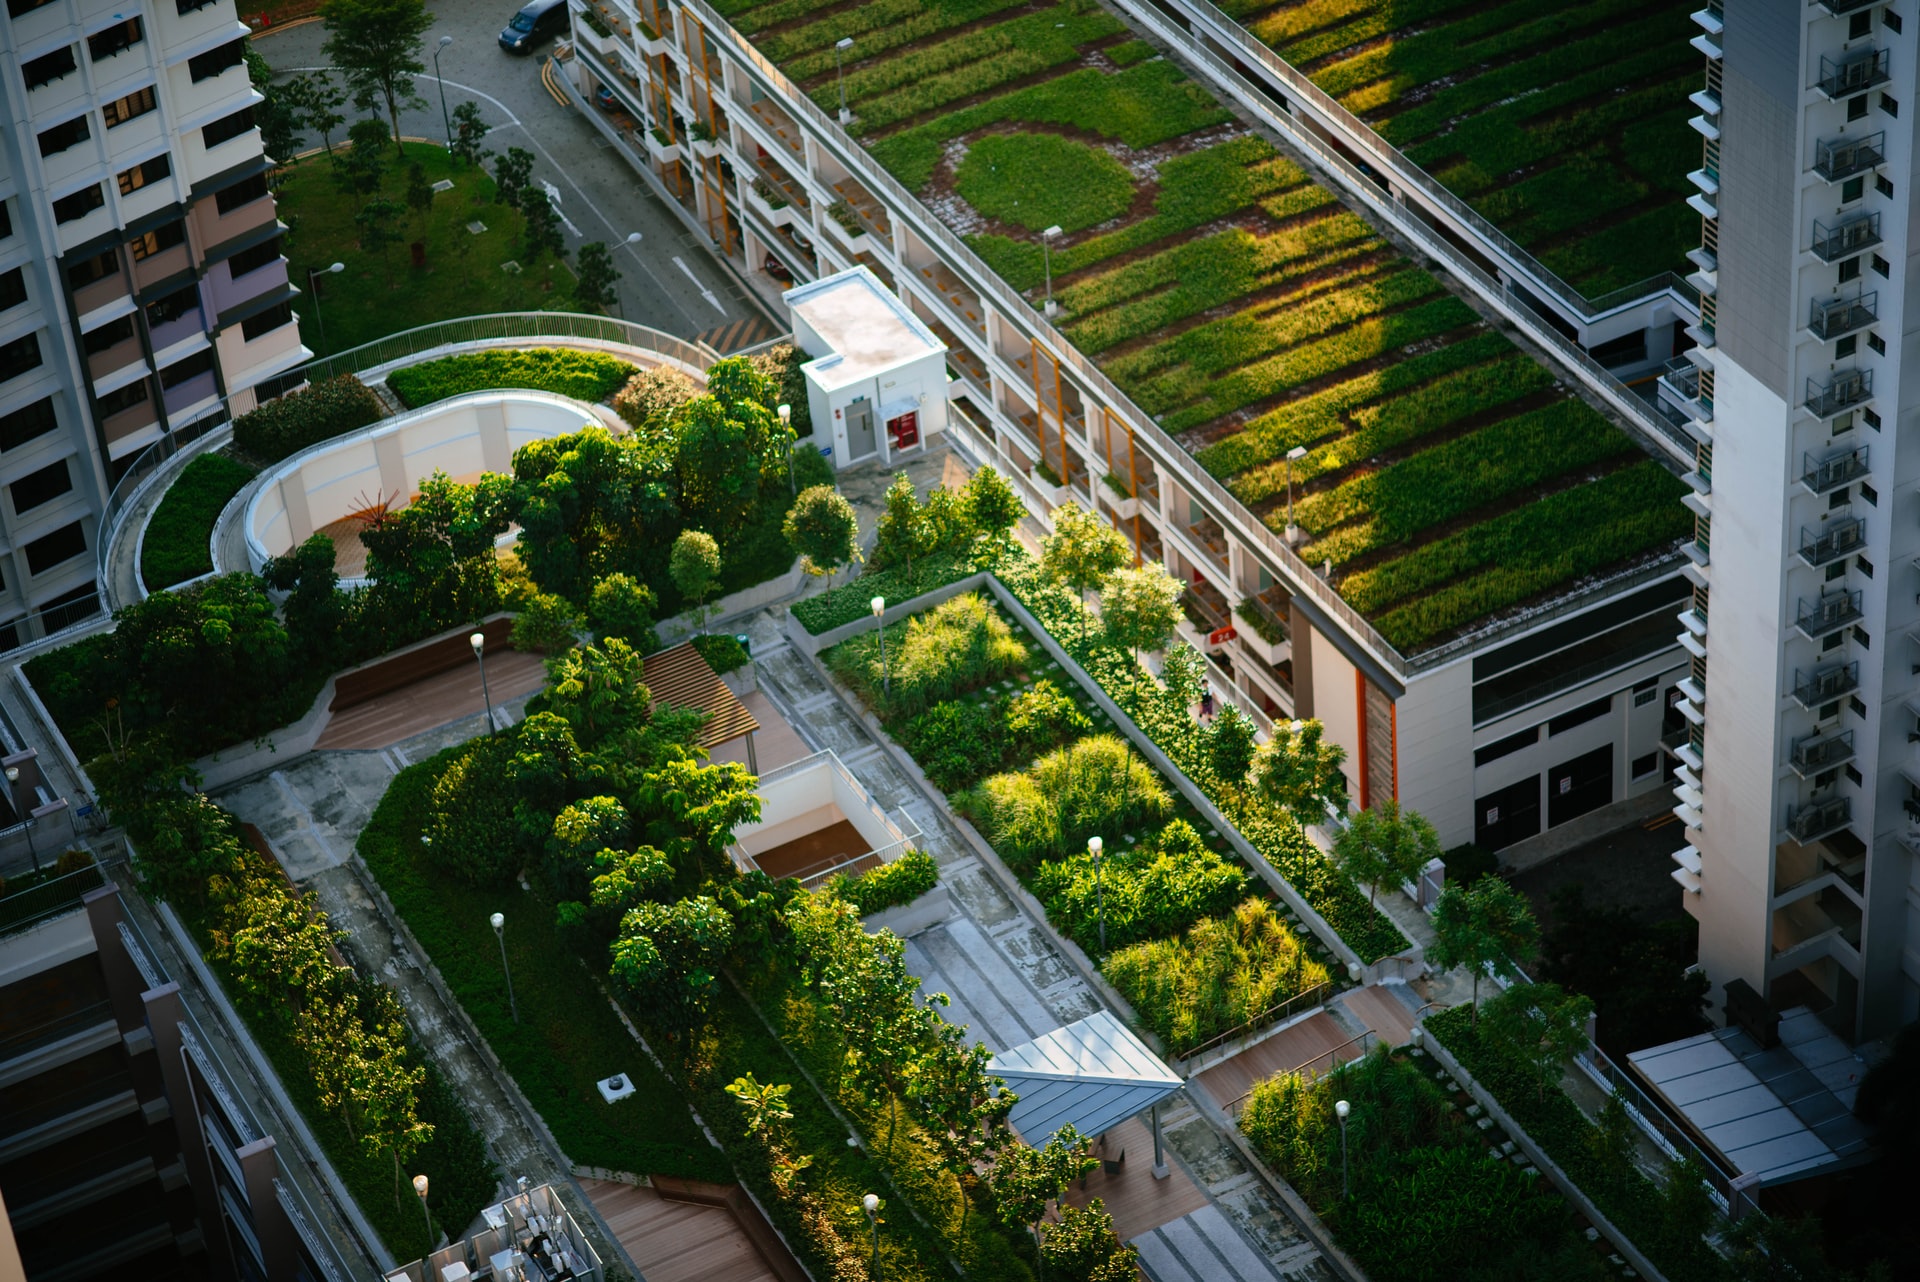 This low-cost method can aid policymakers and planners in empirically evaluating the cooling capacity of green roofs in their own communities.